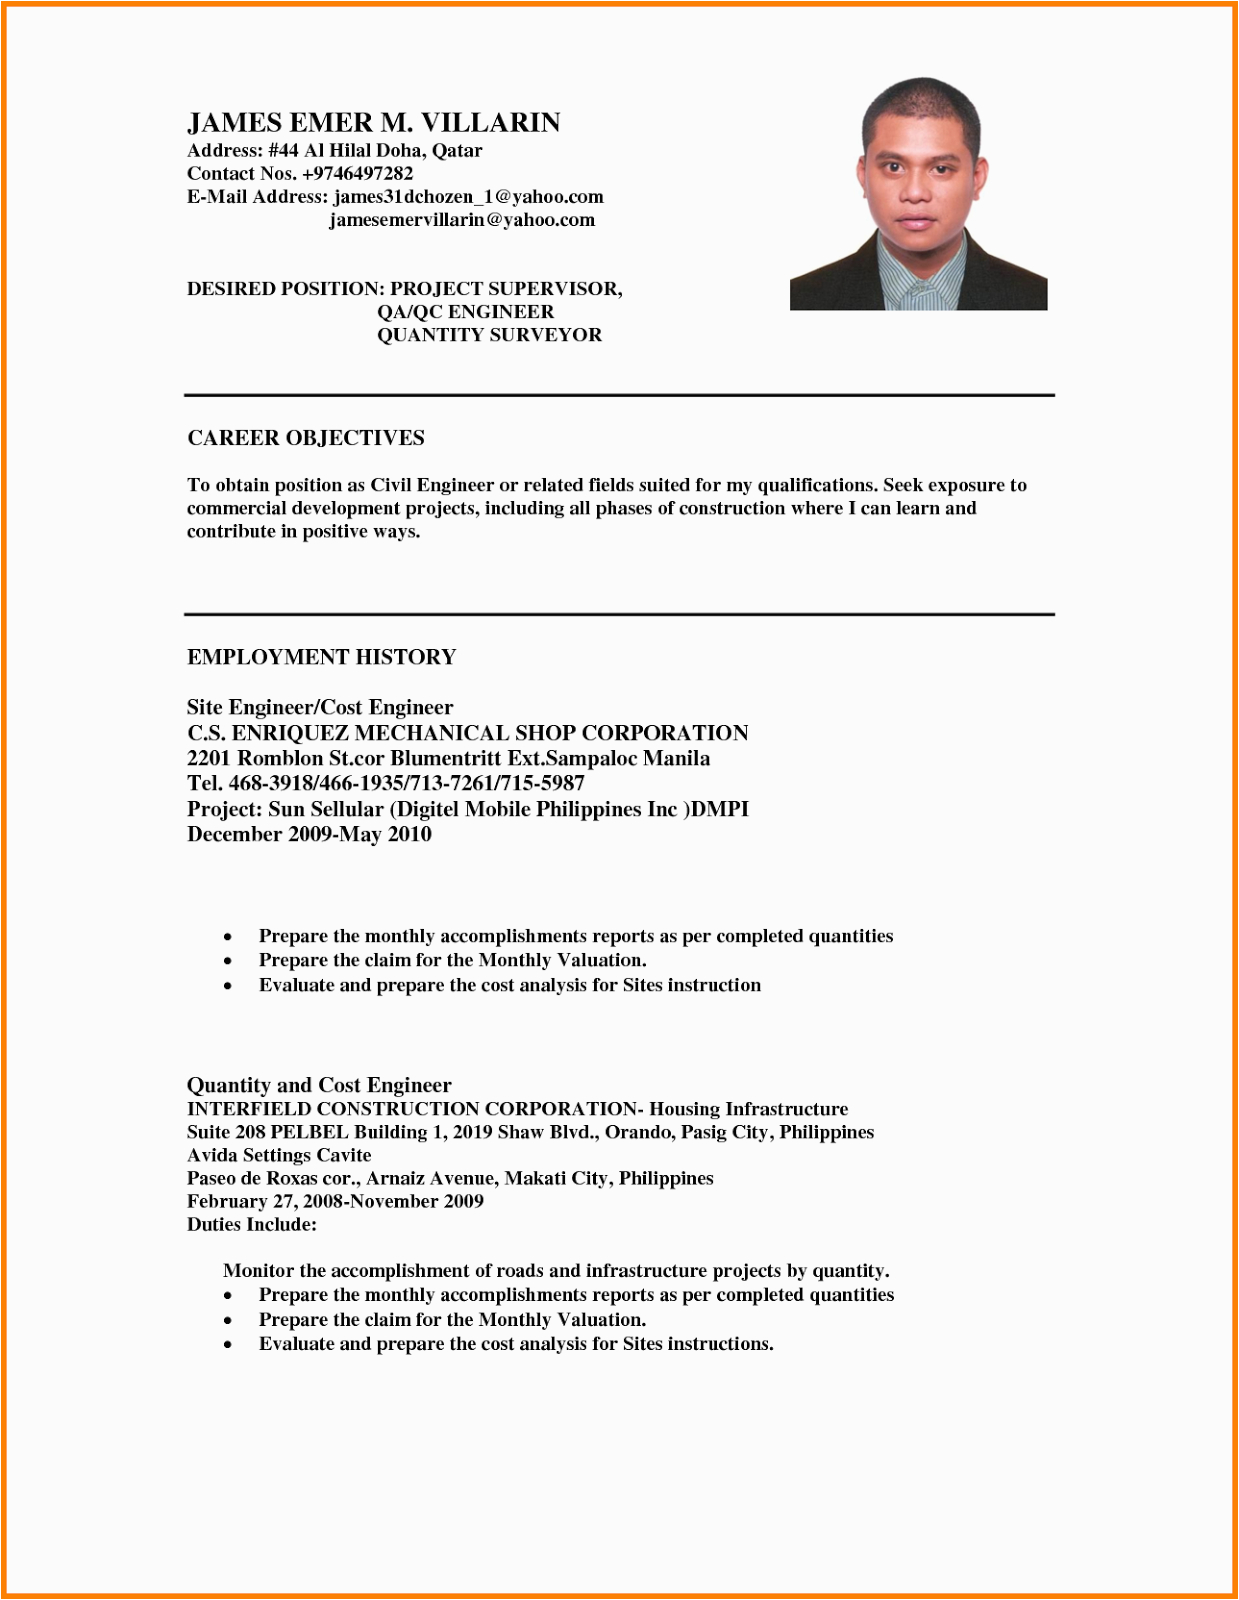 Resume Sample for Ojt Civil Engineering Ojt Resume Sample Philippin News Collections